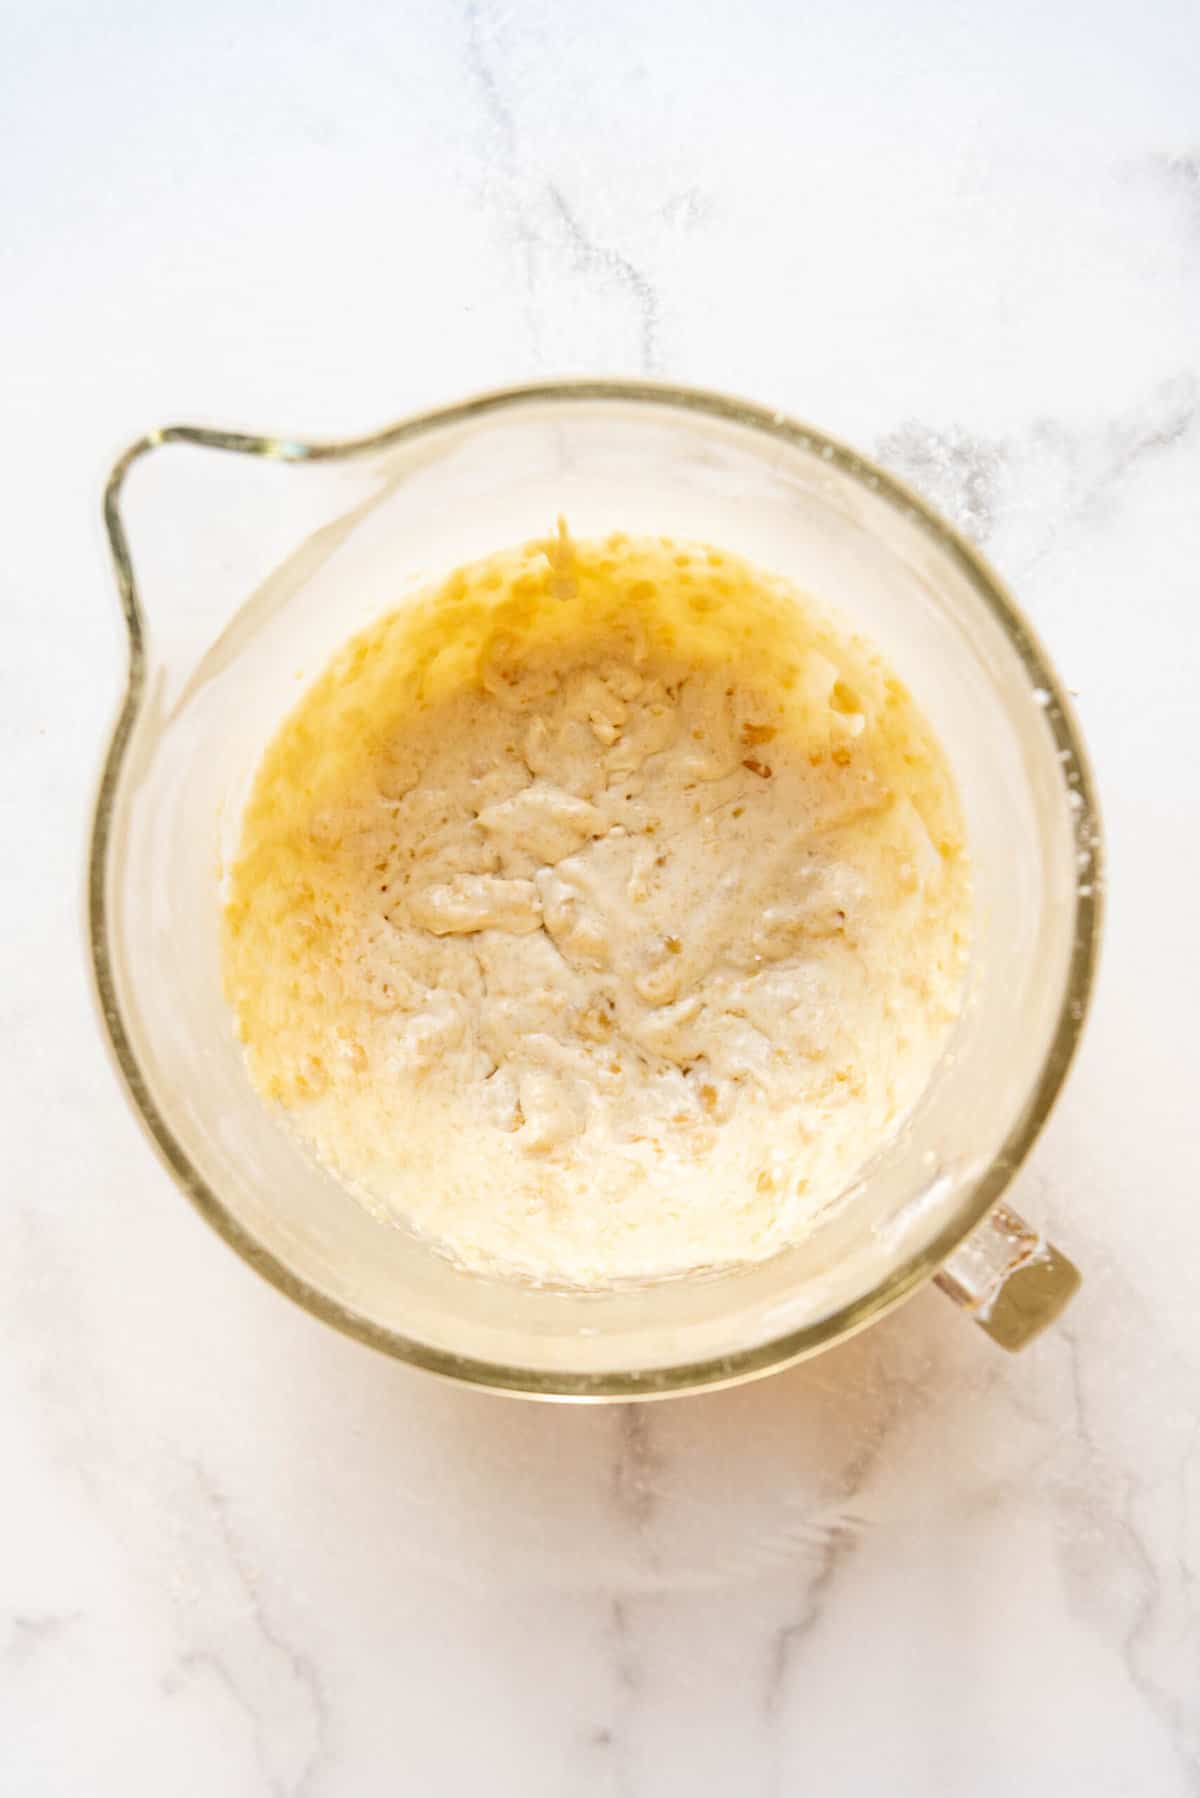 Mixing almond paste, softened butter, and sugar in a glass mixing bowl.